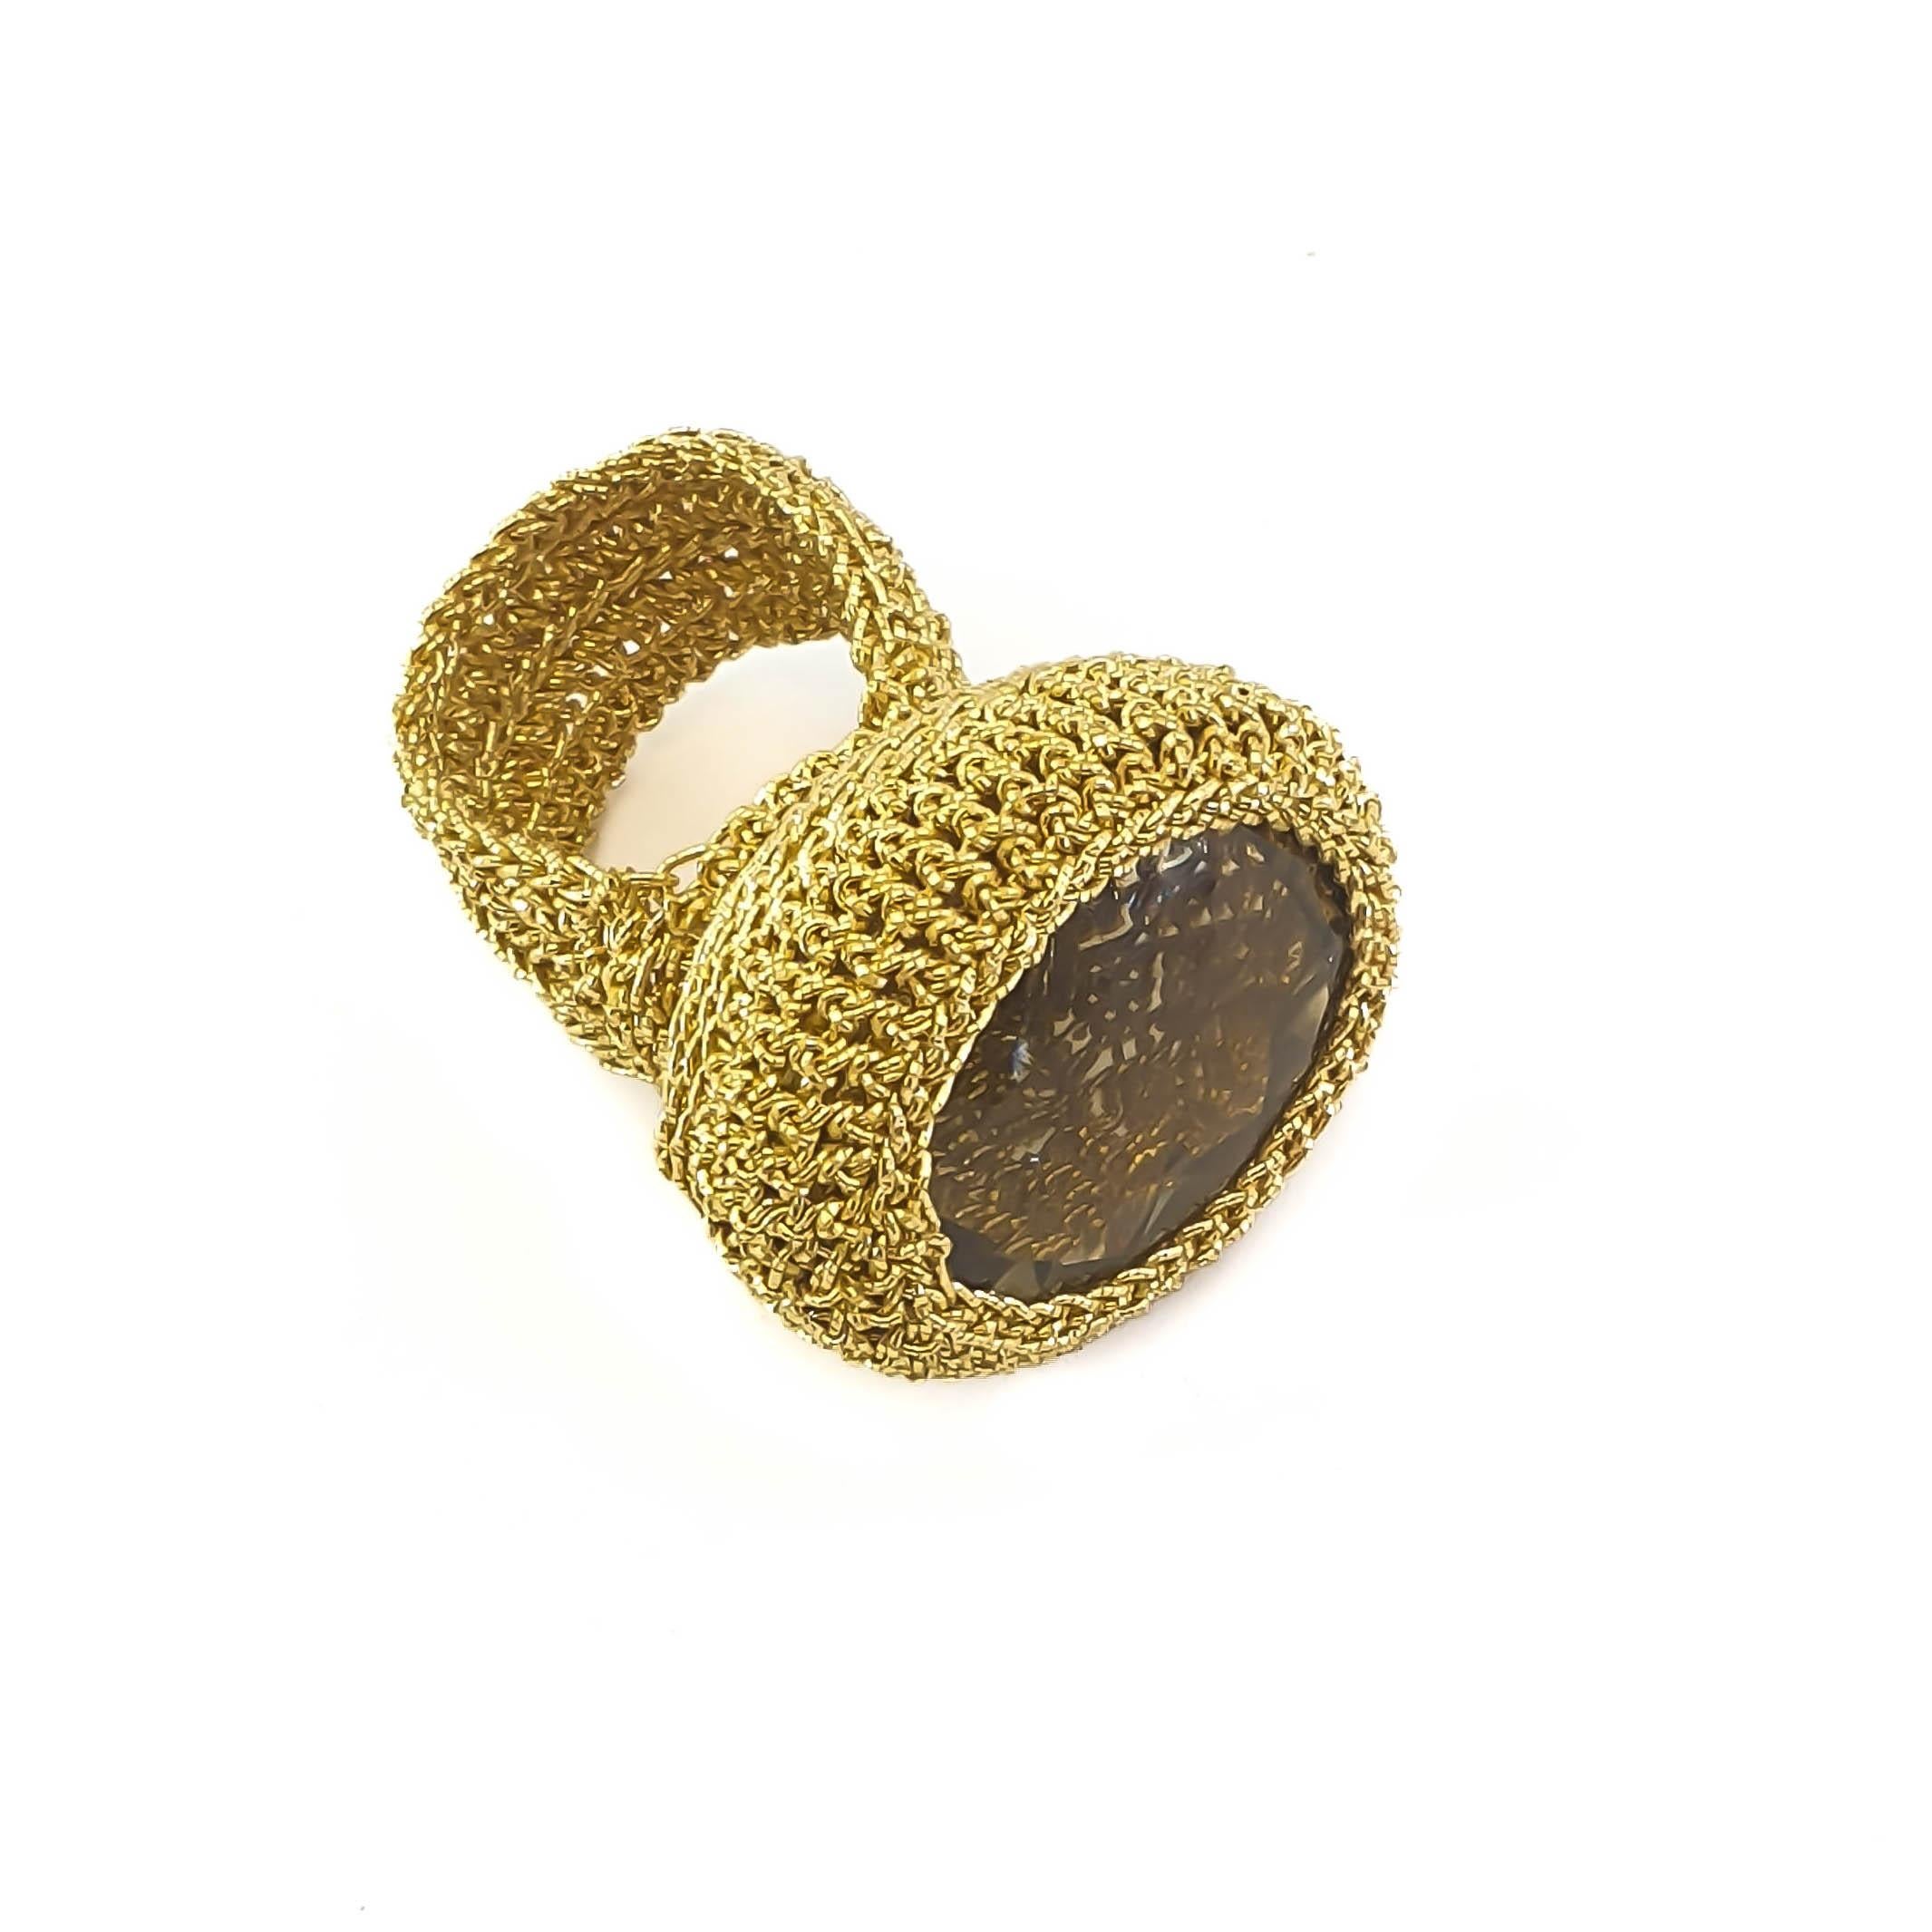 Beautifully crafted hand crochet gold thread (7.26 grams) ring with a natural large Citrine Stone  weighing 9.81 grams (equivalent to 49 carats). The intricate work can be seen through the stone. It is an eye catching ring with a lot of presence.